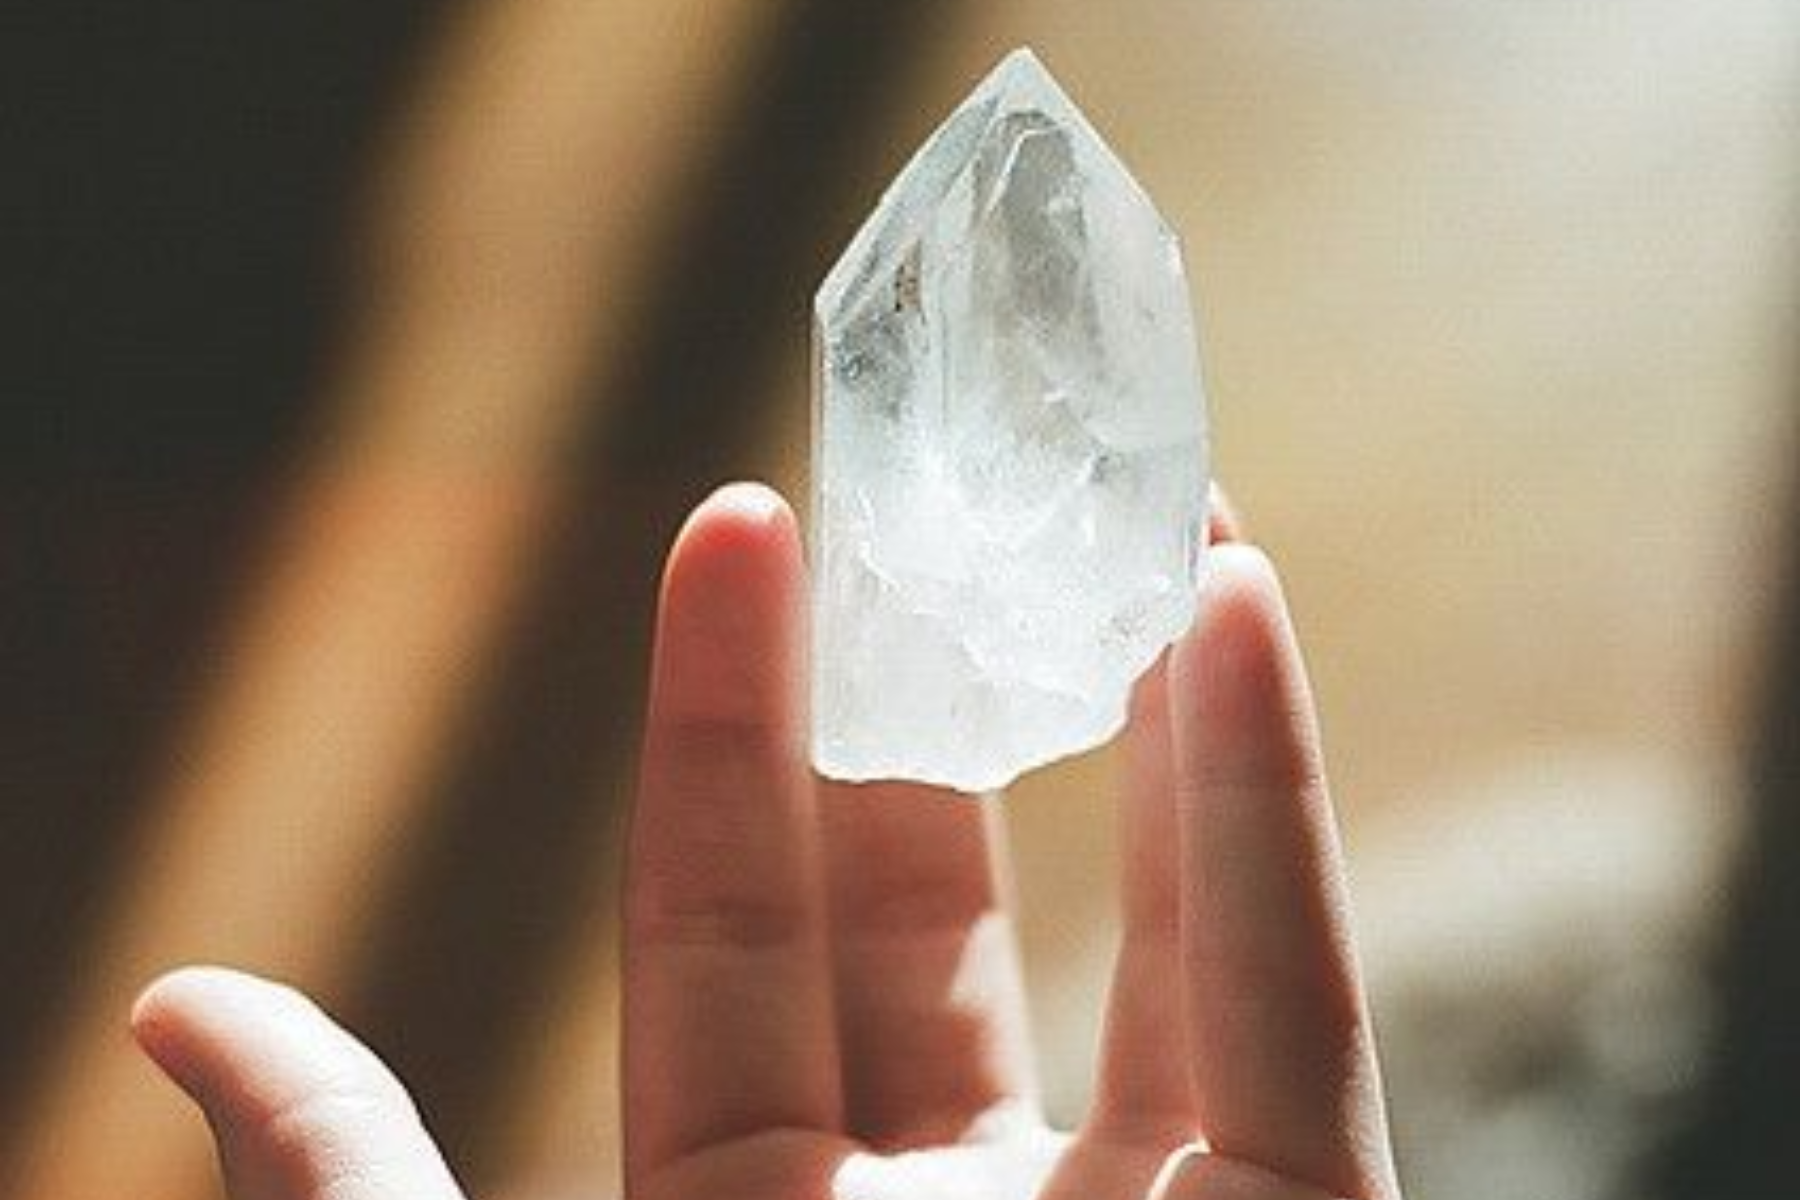 A person's hand raising a clear crystal